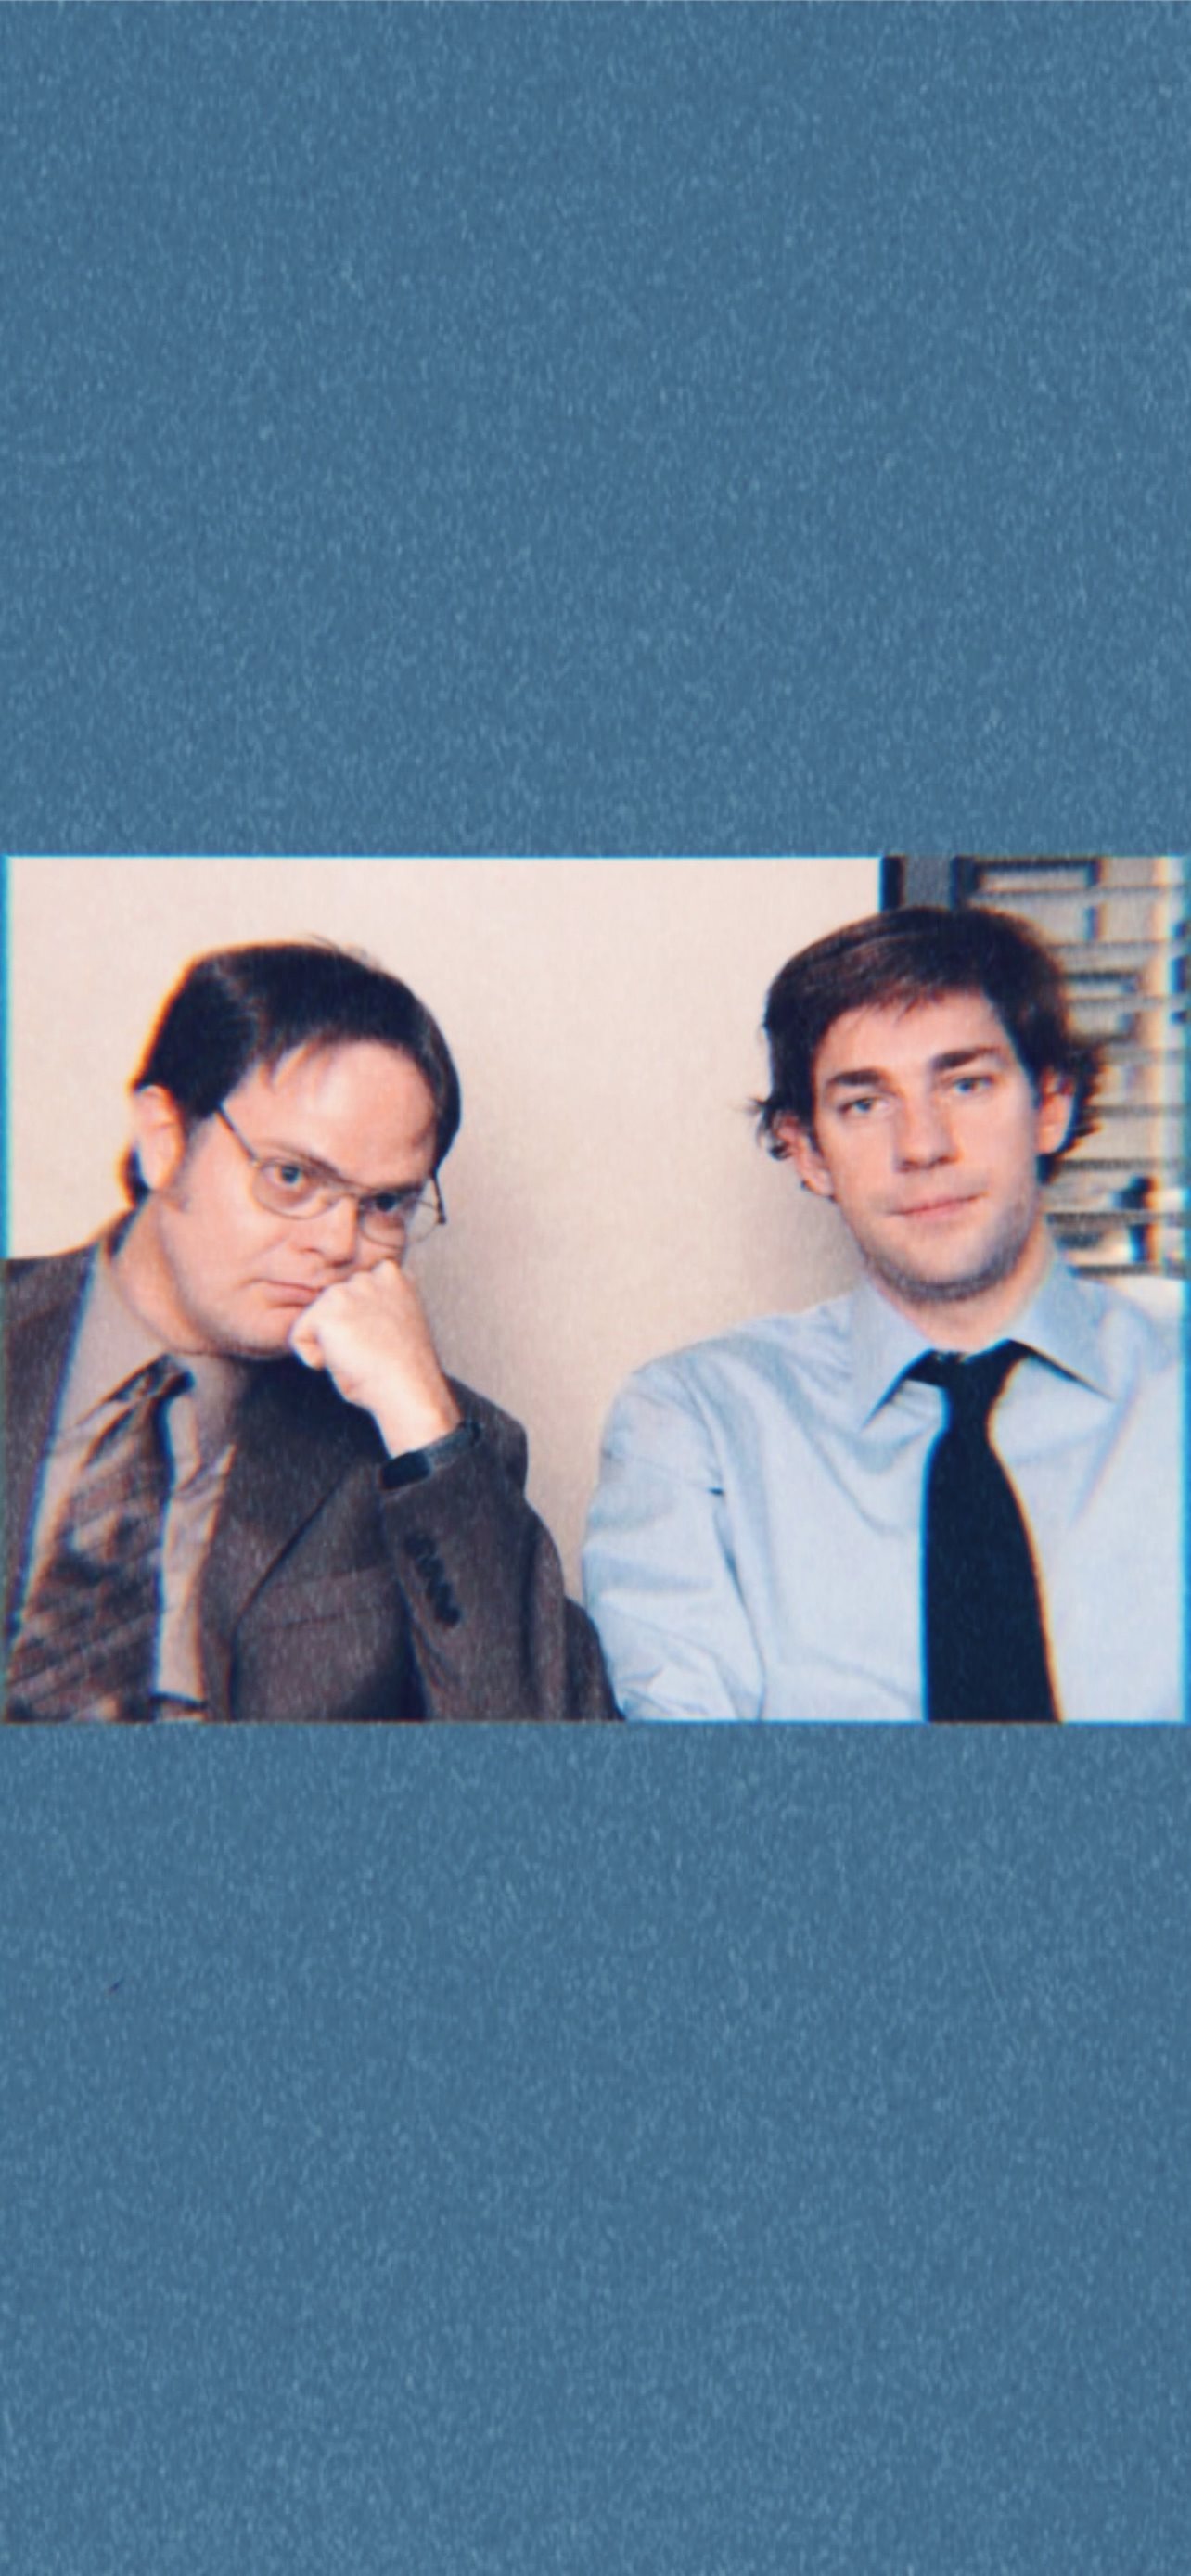 The Office Wallpaper  Office wallpaper The office The office show